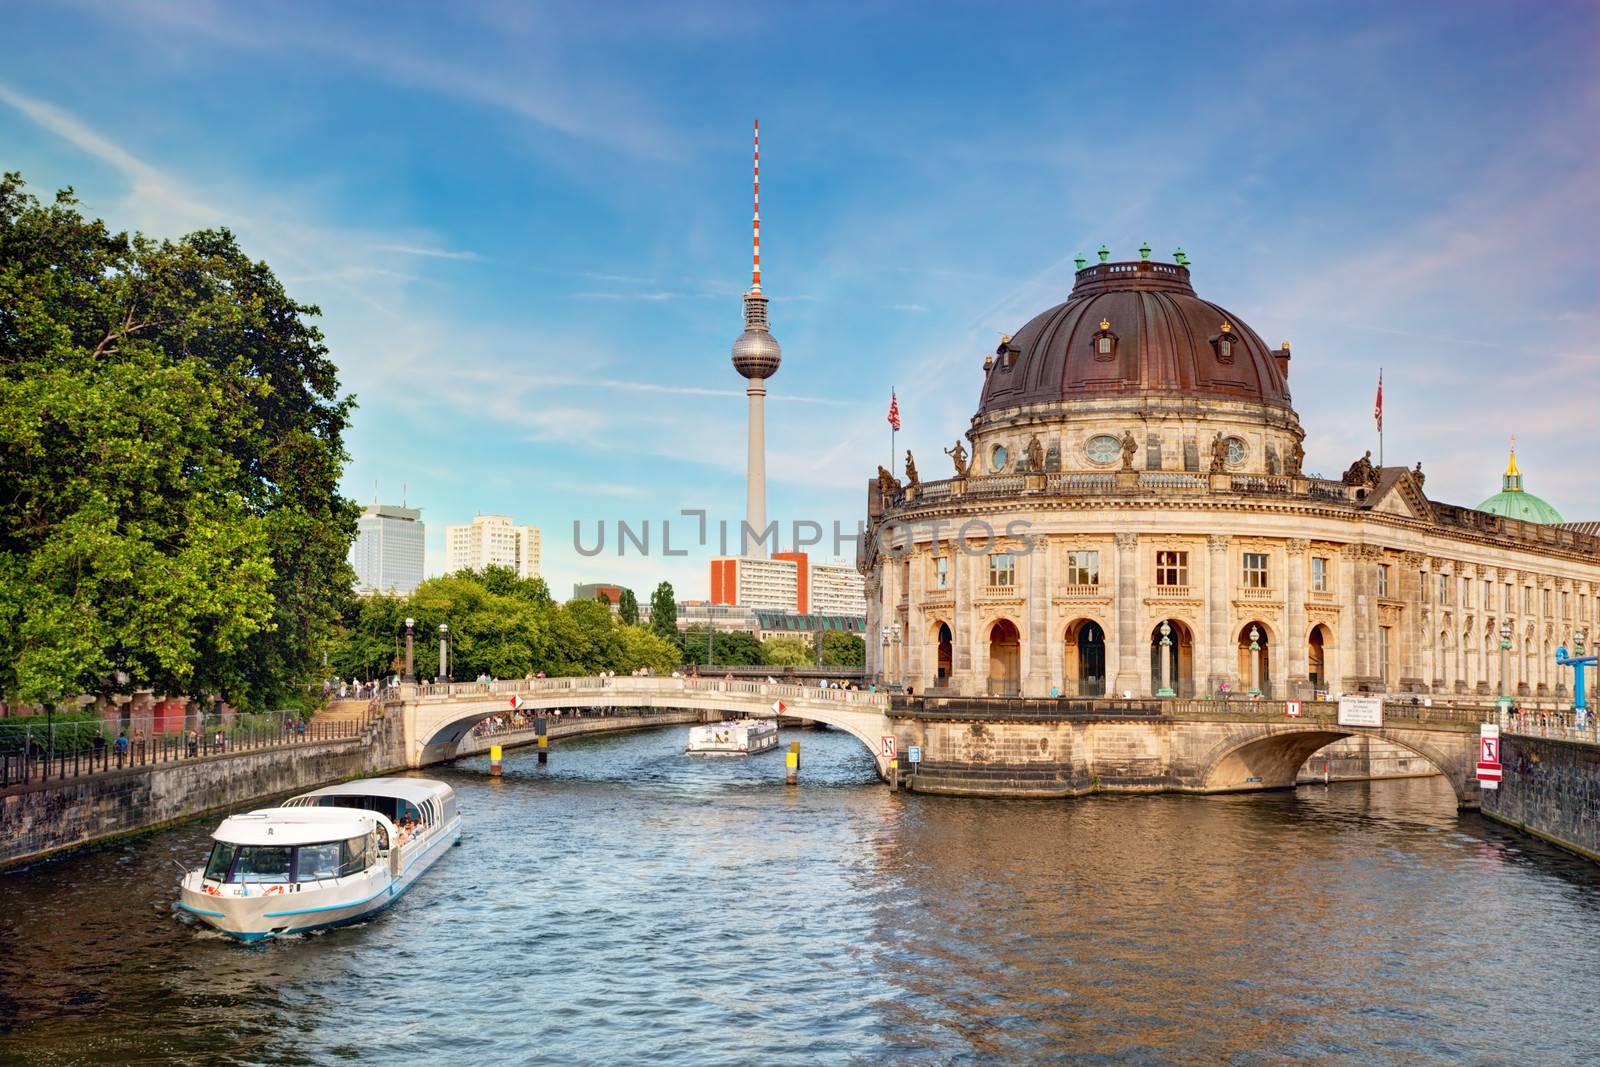 The Bode Museum, Berlin, Germany by photocreo